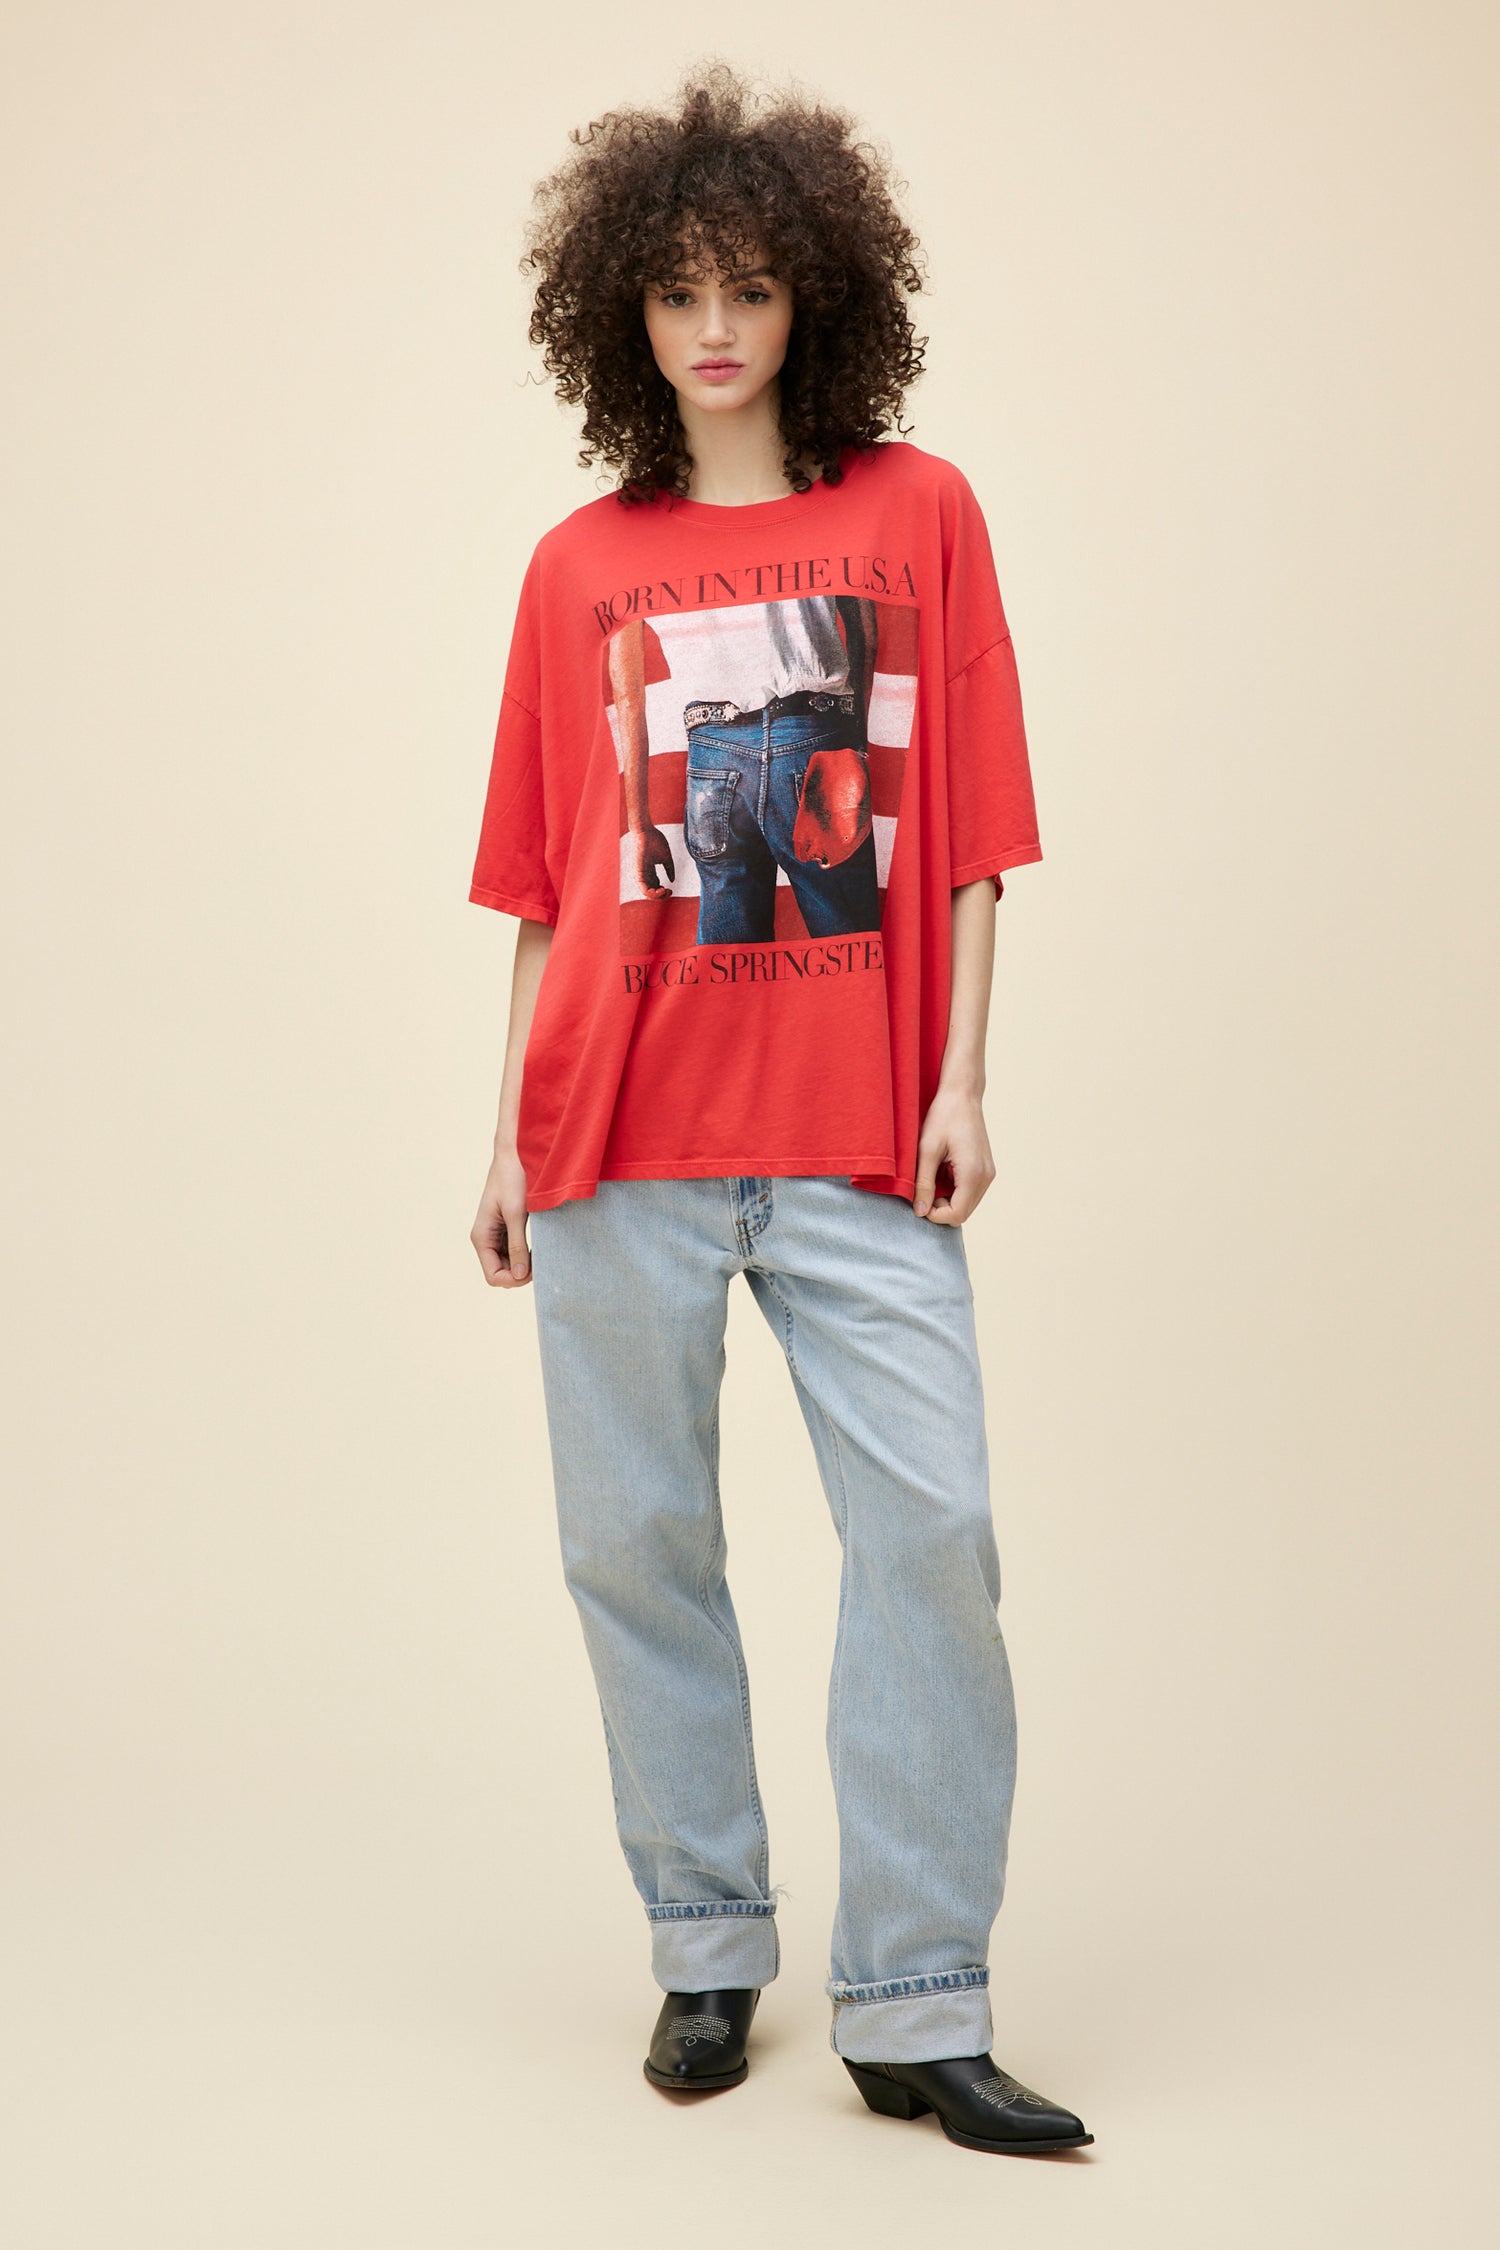 A  model featuring a red one-size shirt designed with the graphics inspired by Bruce Springsteen's "Born in the USA" album art.